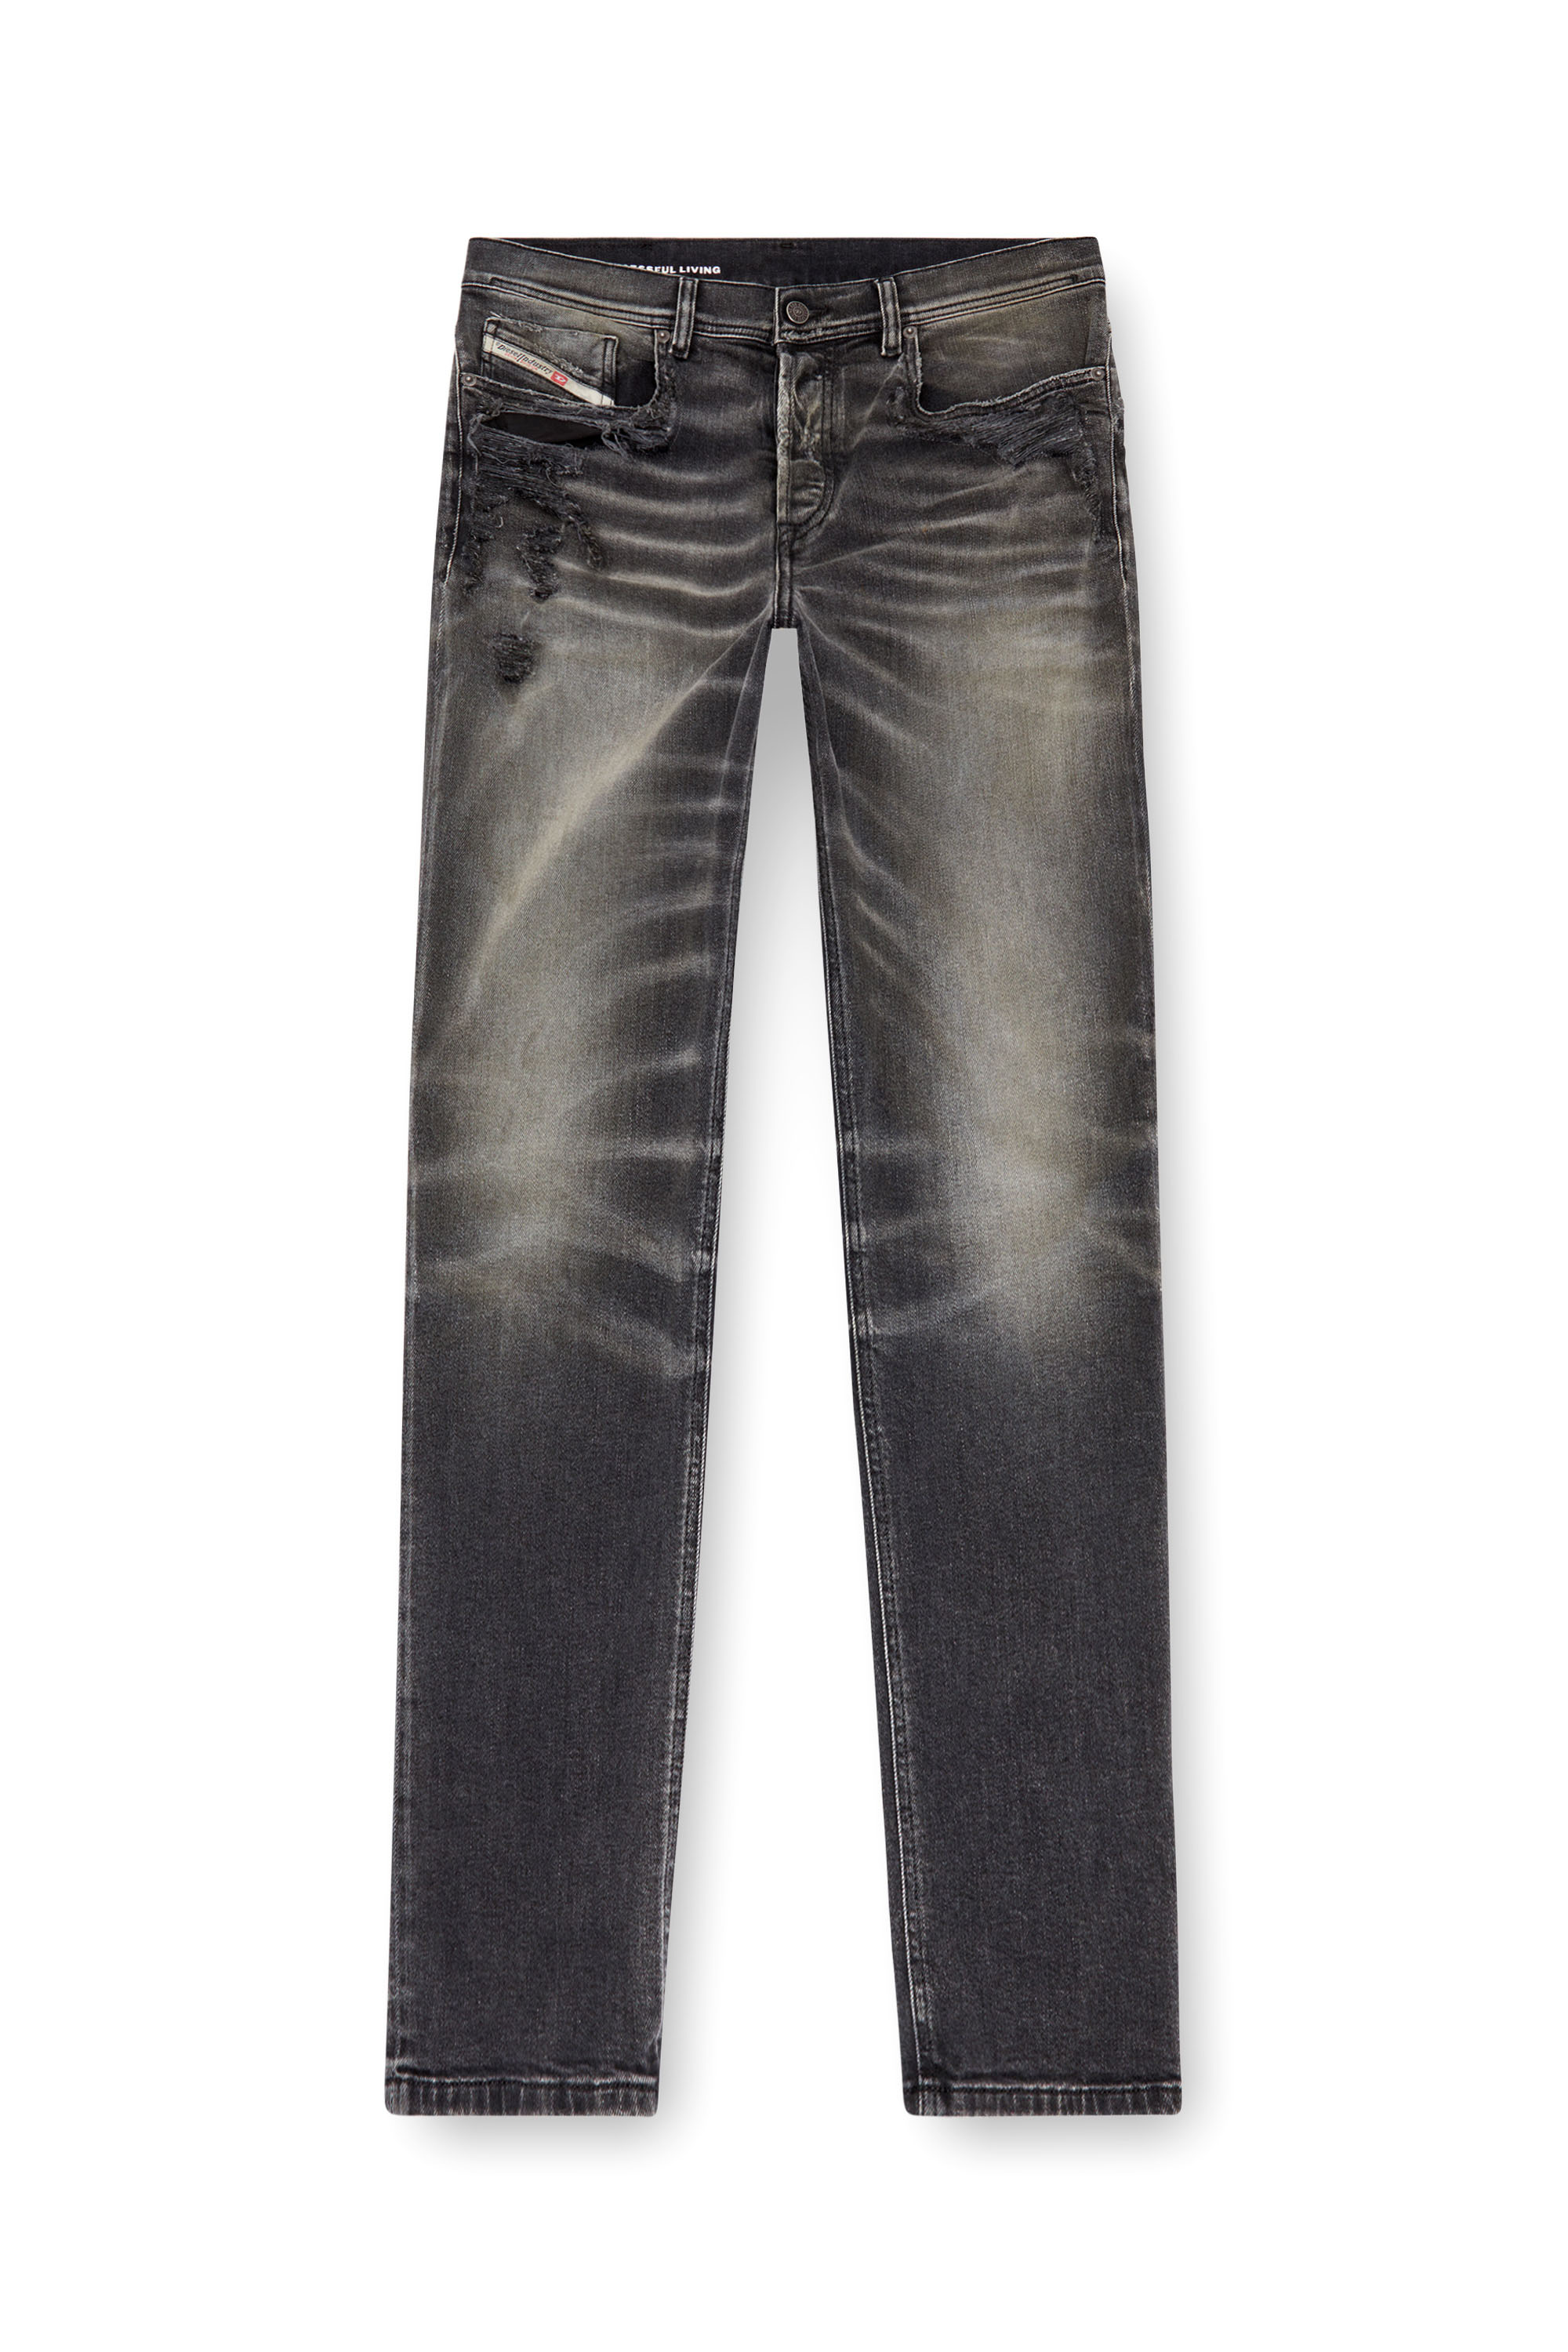 Diesel - Tapered Jeans 2023 D-Finitive 09K25, Hombre Tapered Jeans - 2023 D-Finitive in Negro - Image 3